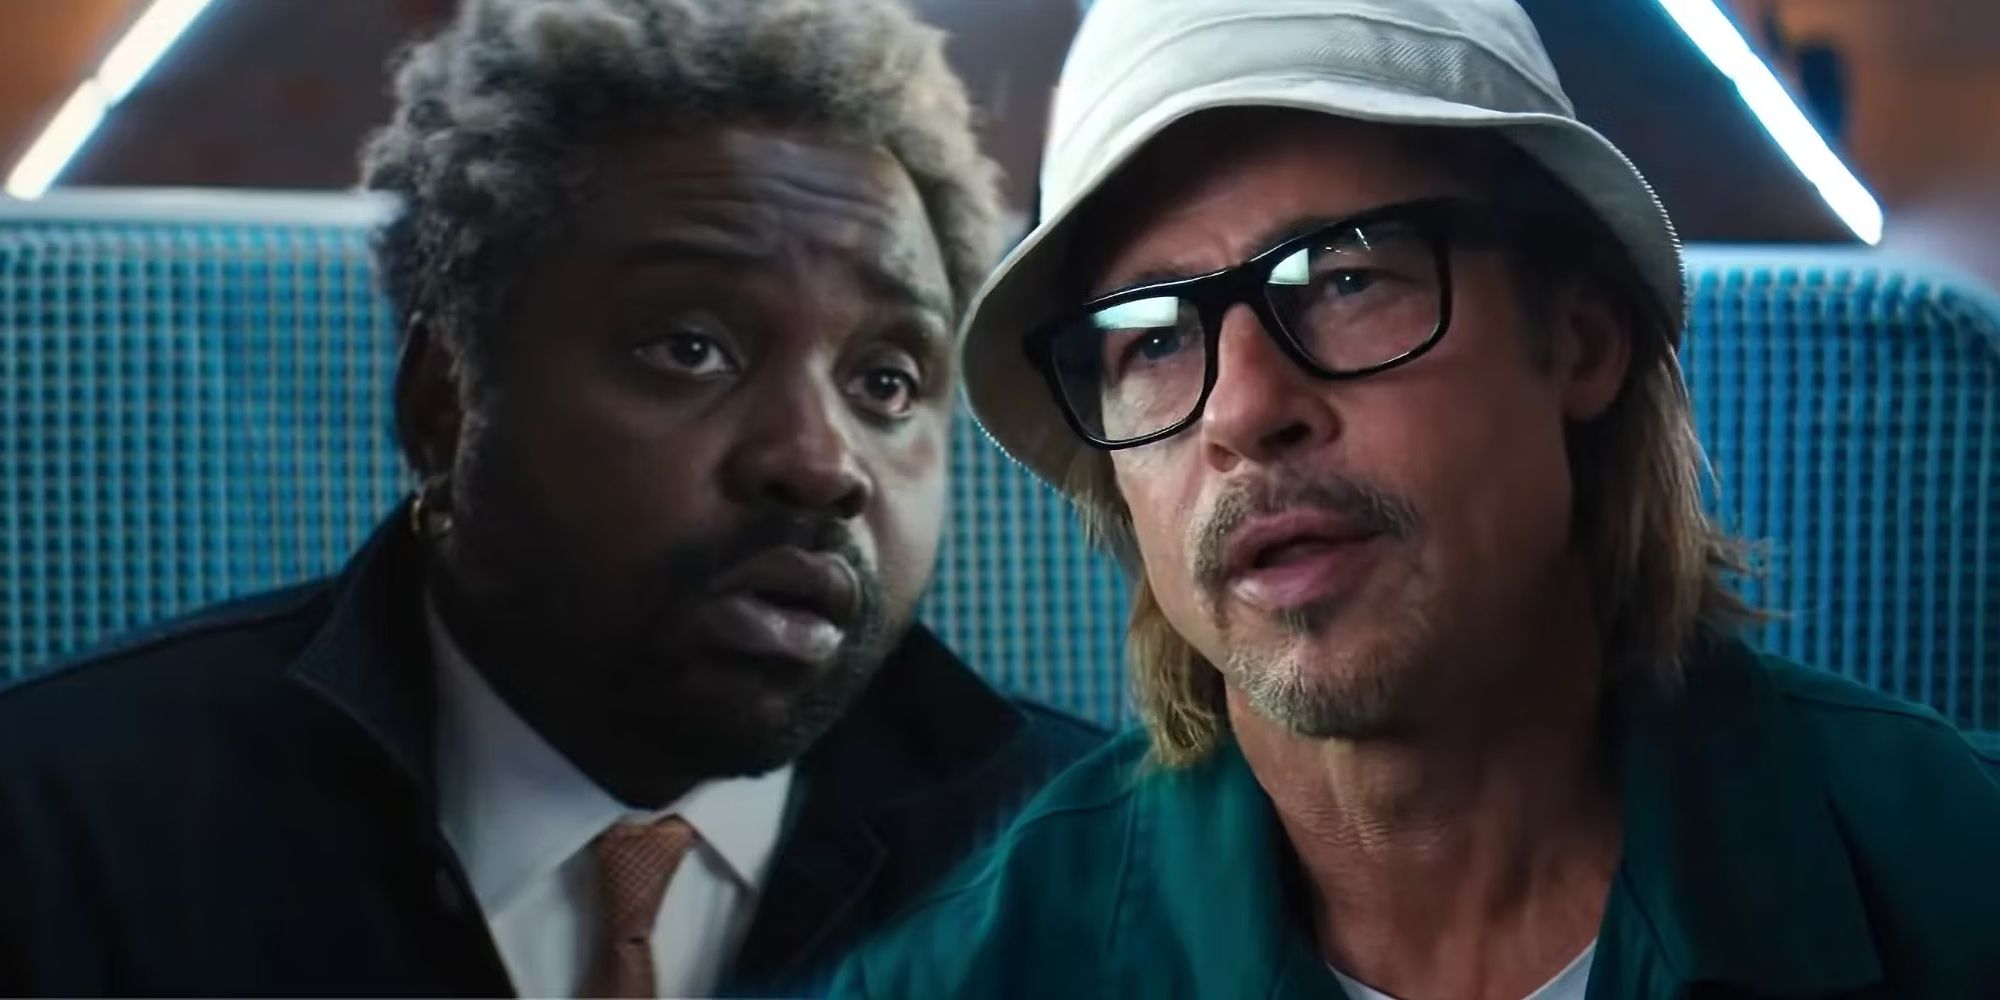 “People Don’t Understand”: Why A Seated Fight Scene In Brad Pitt’s $239M Action Movie Was A Major Challenge